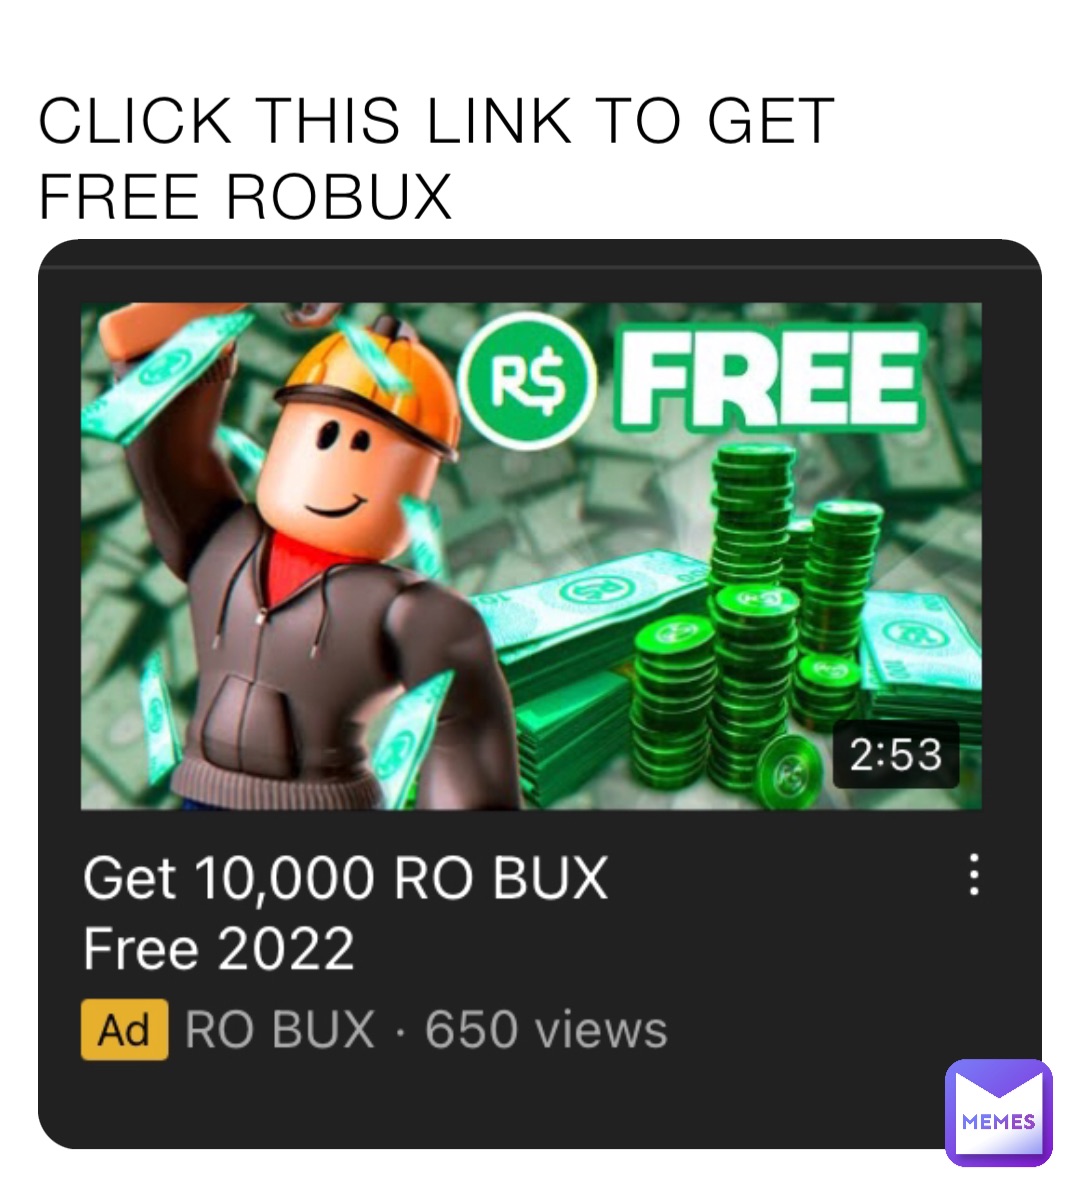 CLICK THIS LINK TO GET FREE ROBUX